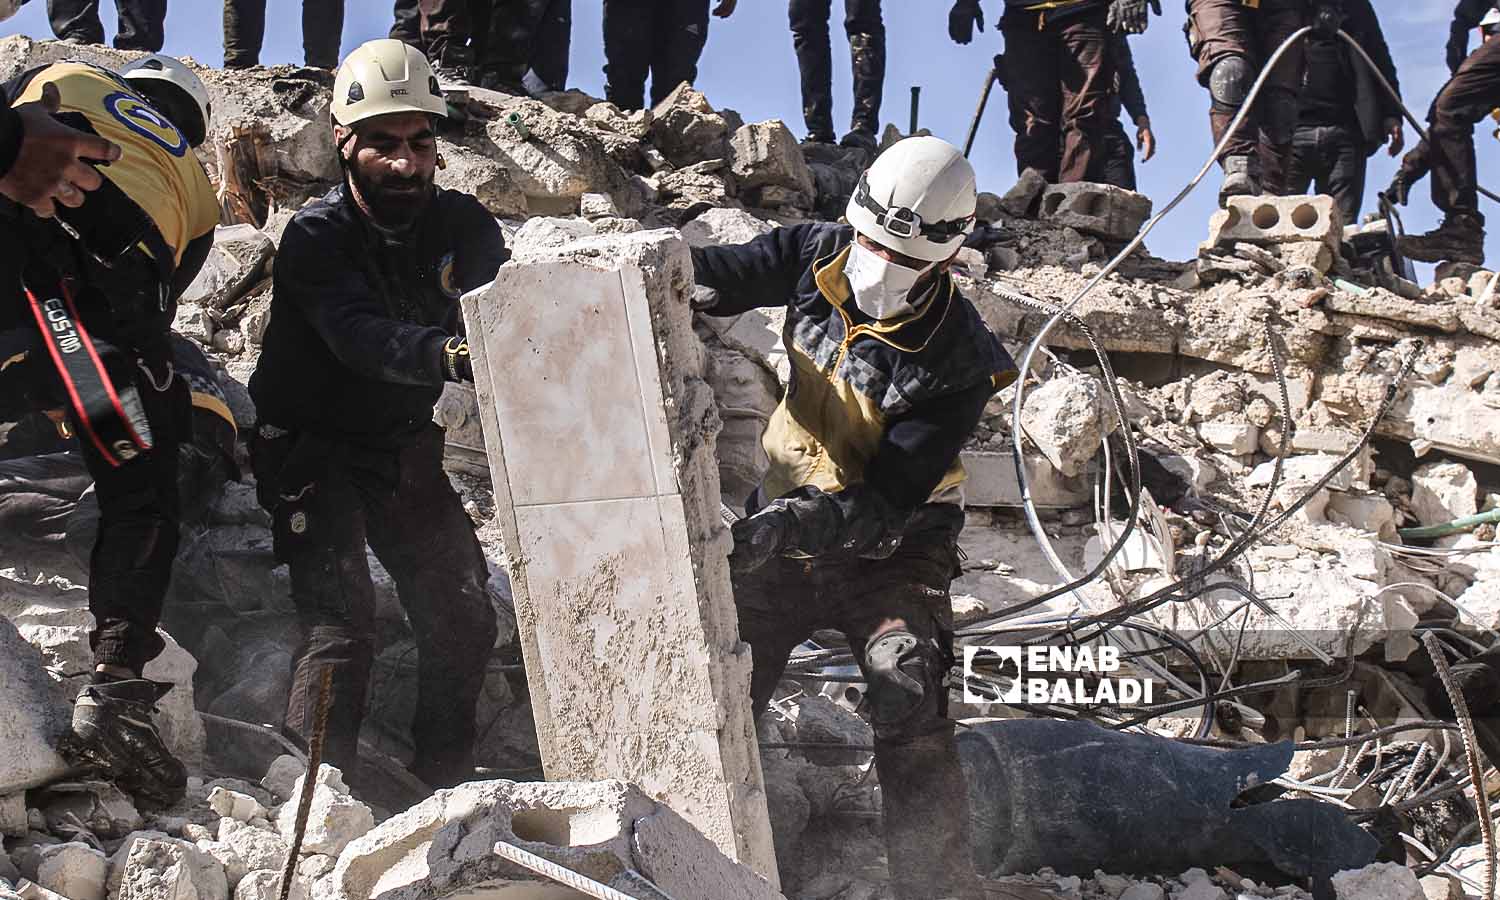 Volunteers from the Syria Civil Defense (SCD) teams try to rescue and recover victims from under the rubble in Armanaz town following the earthquake that hit the northwestern Syrian region - February 7, 2023 (Enab Baladi/Iyad Abdul Jawad)
